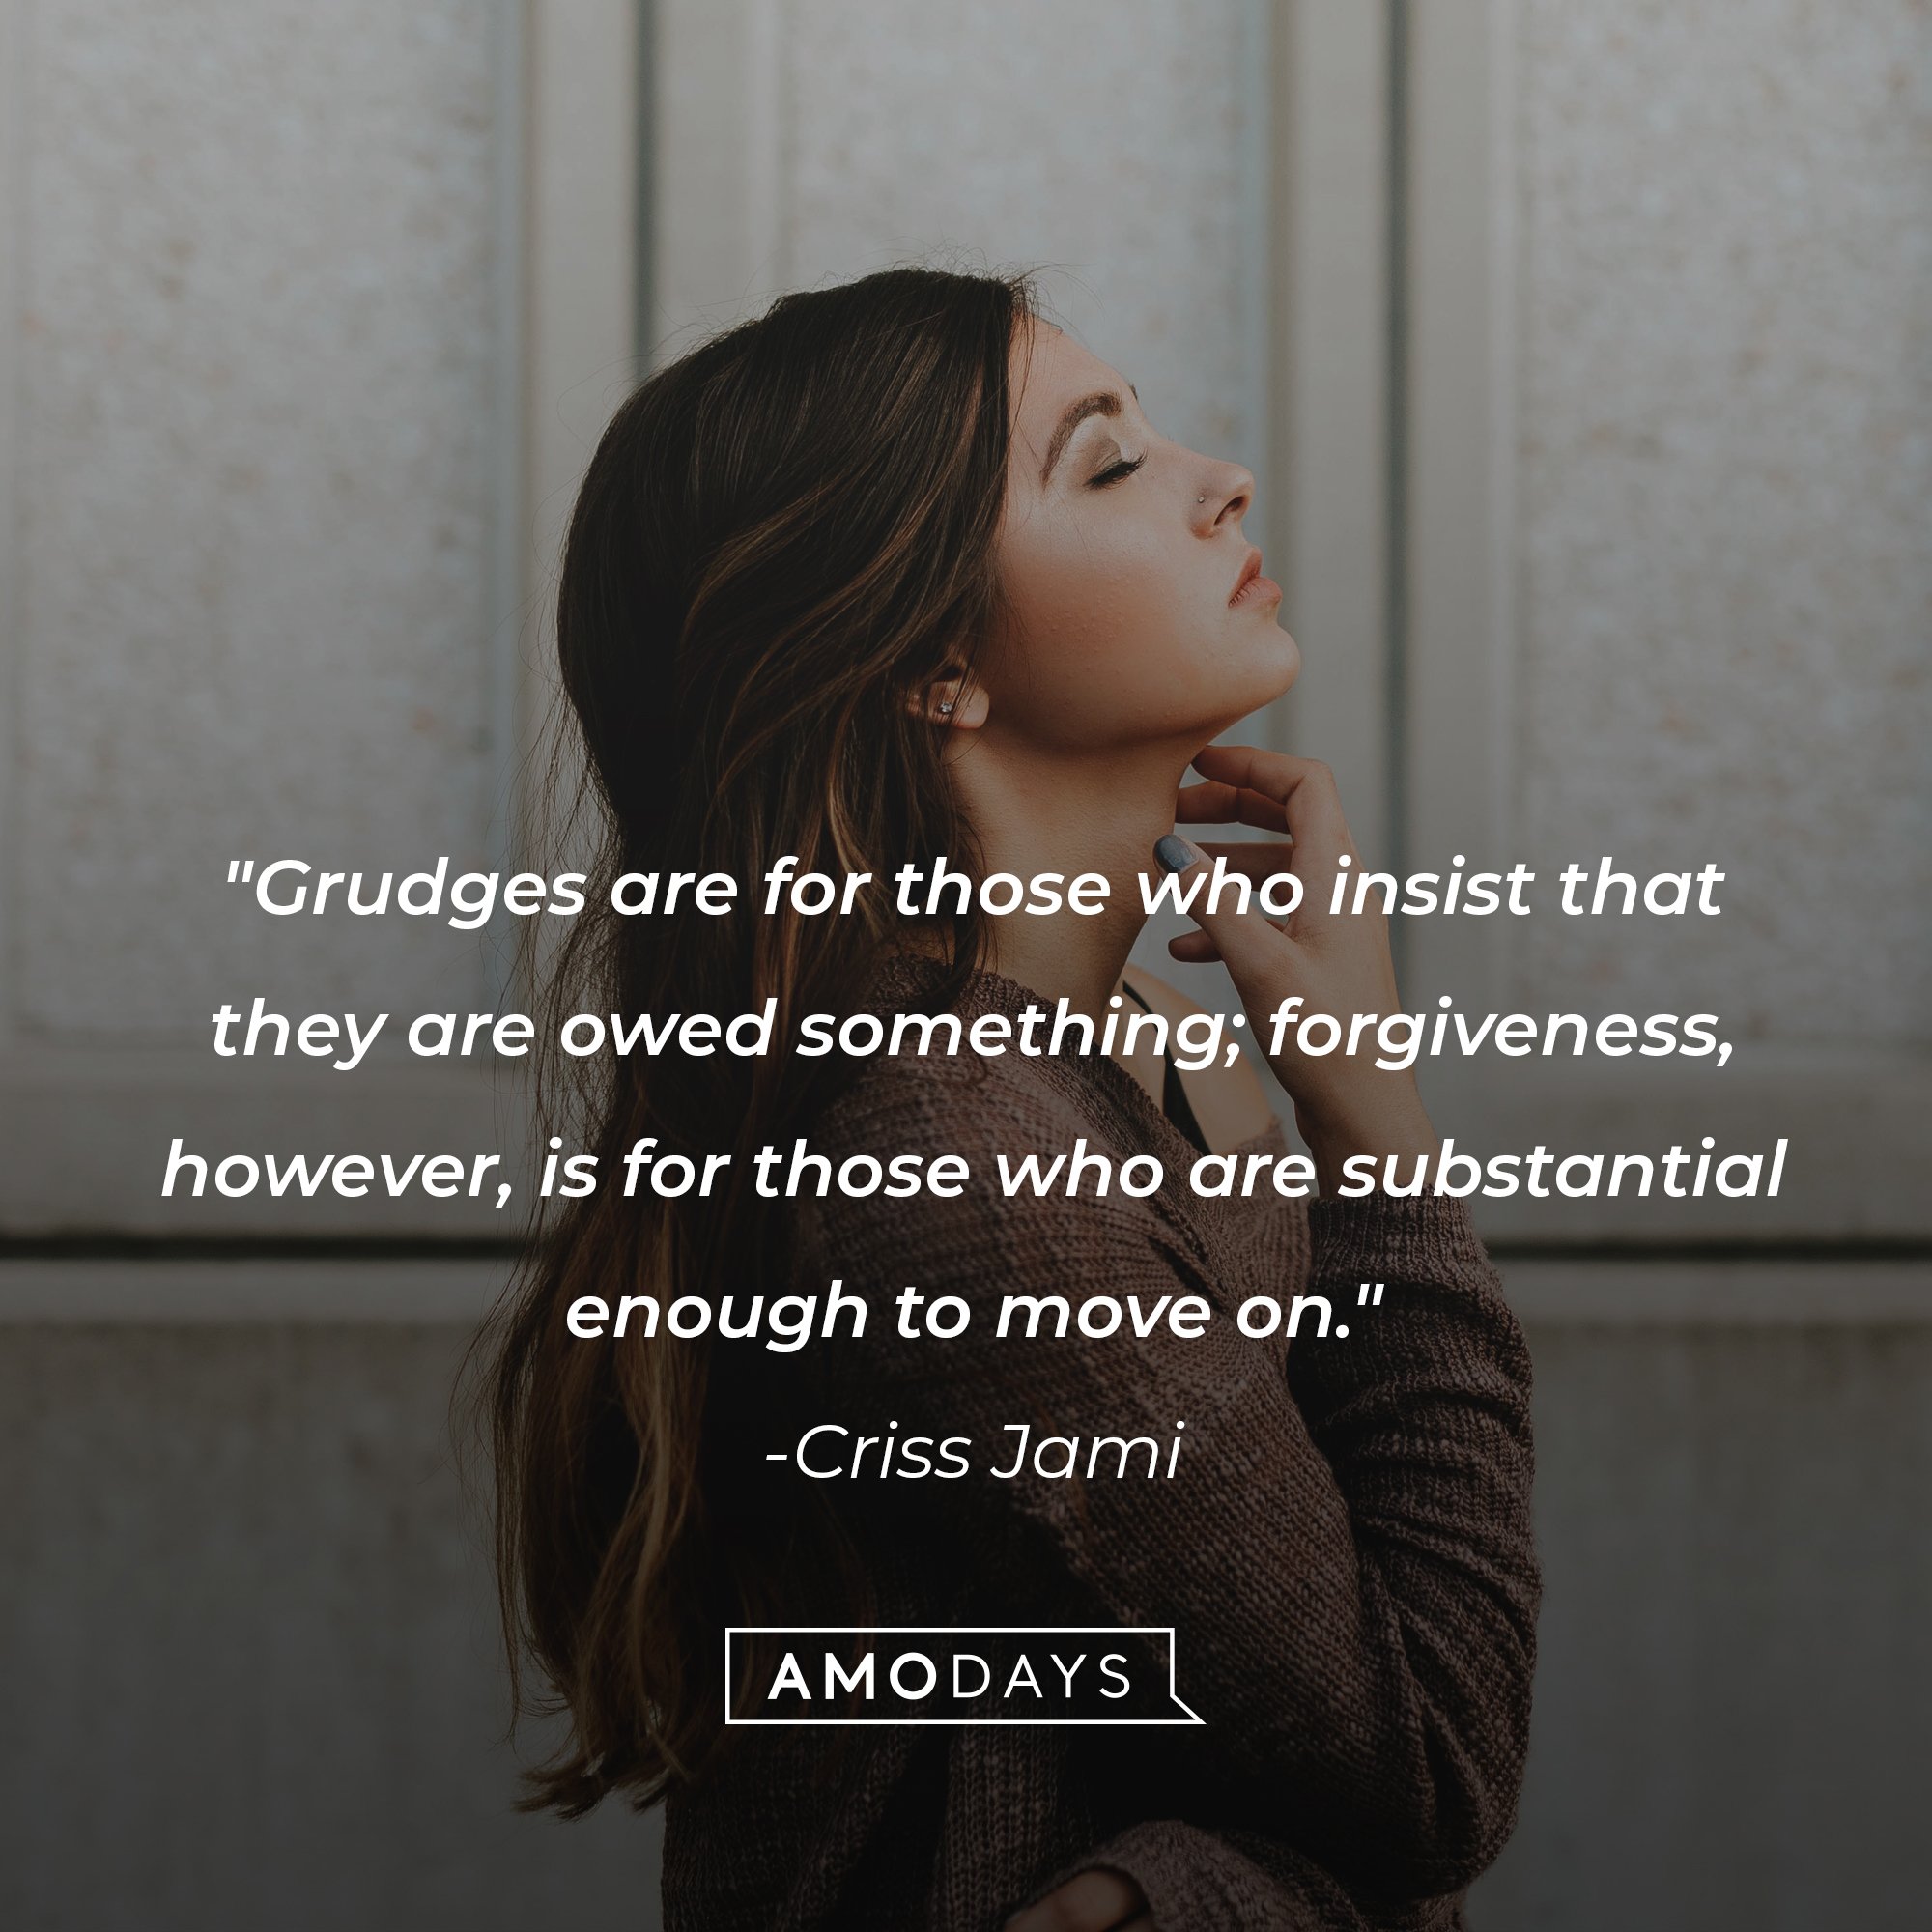 Criss Jami’s quote: "Grudges are for those who insist that they are owed something; forgiveness, however, is for those who are substantial enough to move on." | Image: AmoDays     